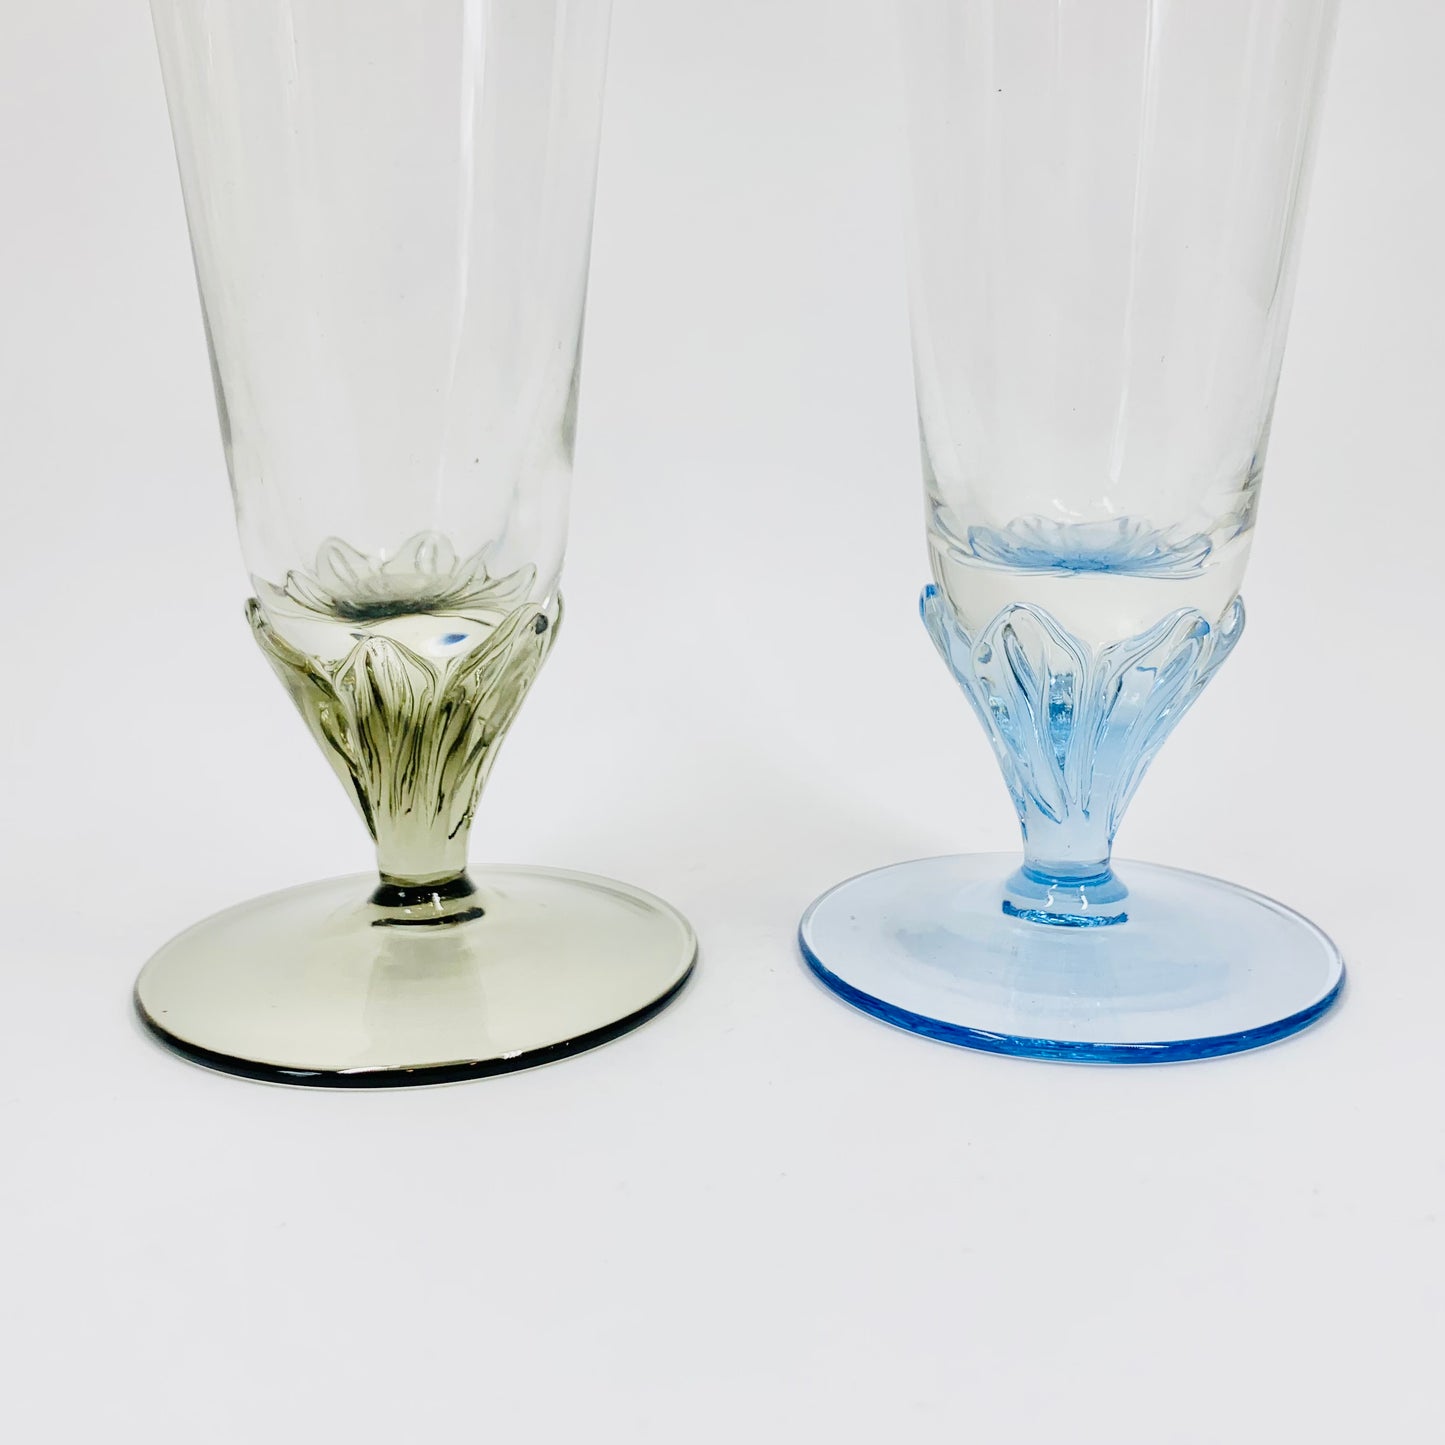 Midcentury harlequin glass champagne flutes with twist stems